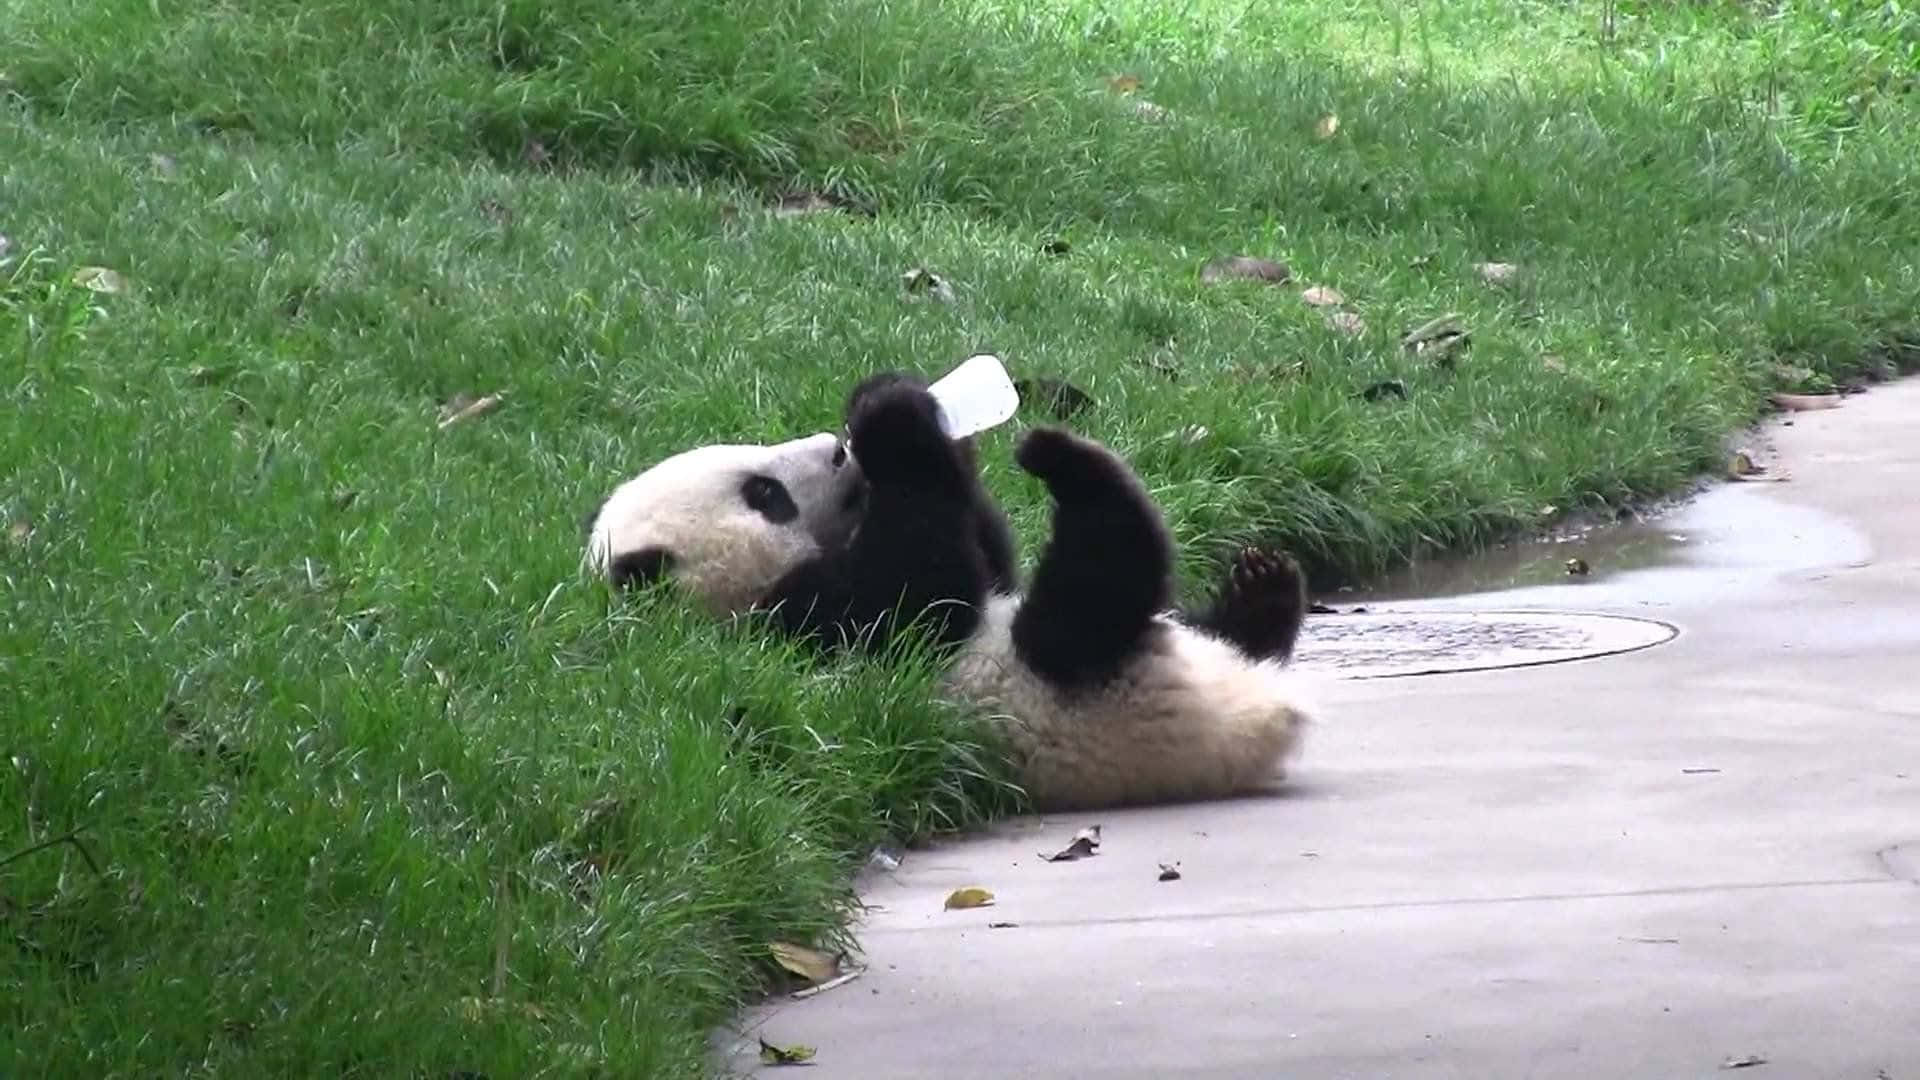 A beautiful panda enjoying some rest and relaxation in a natural outdoor setting.